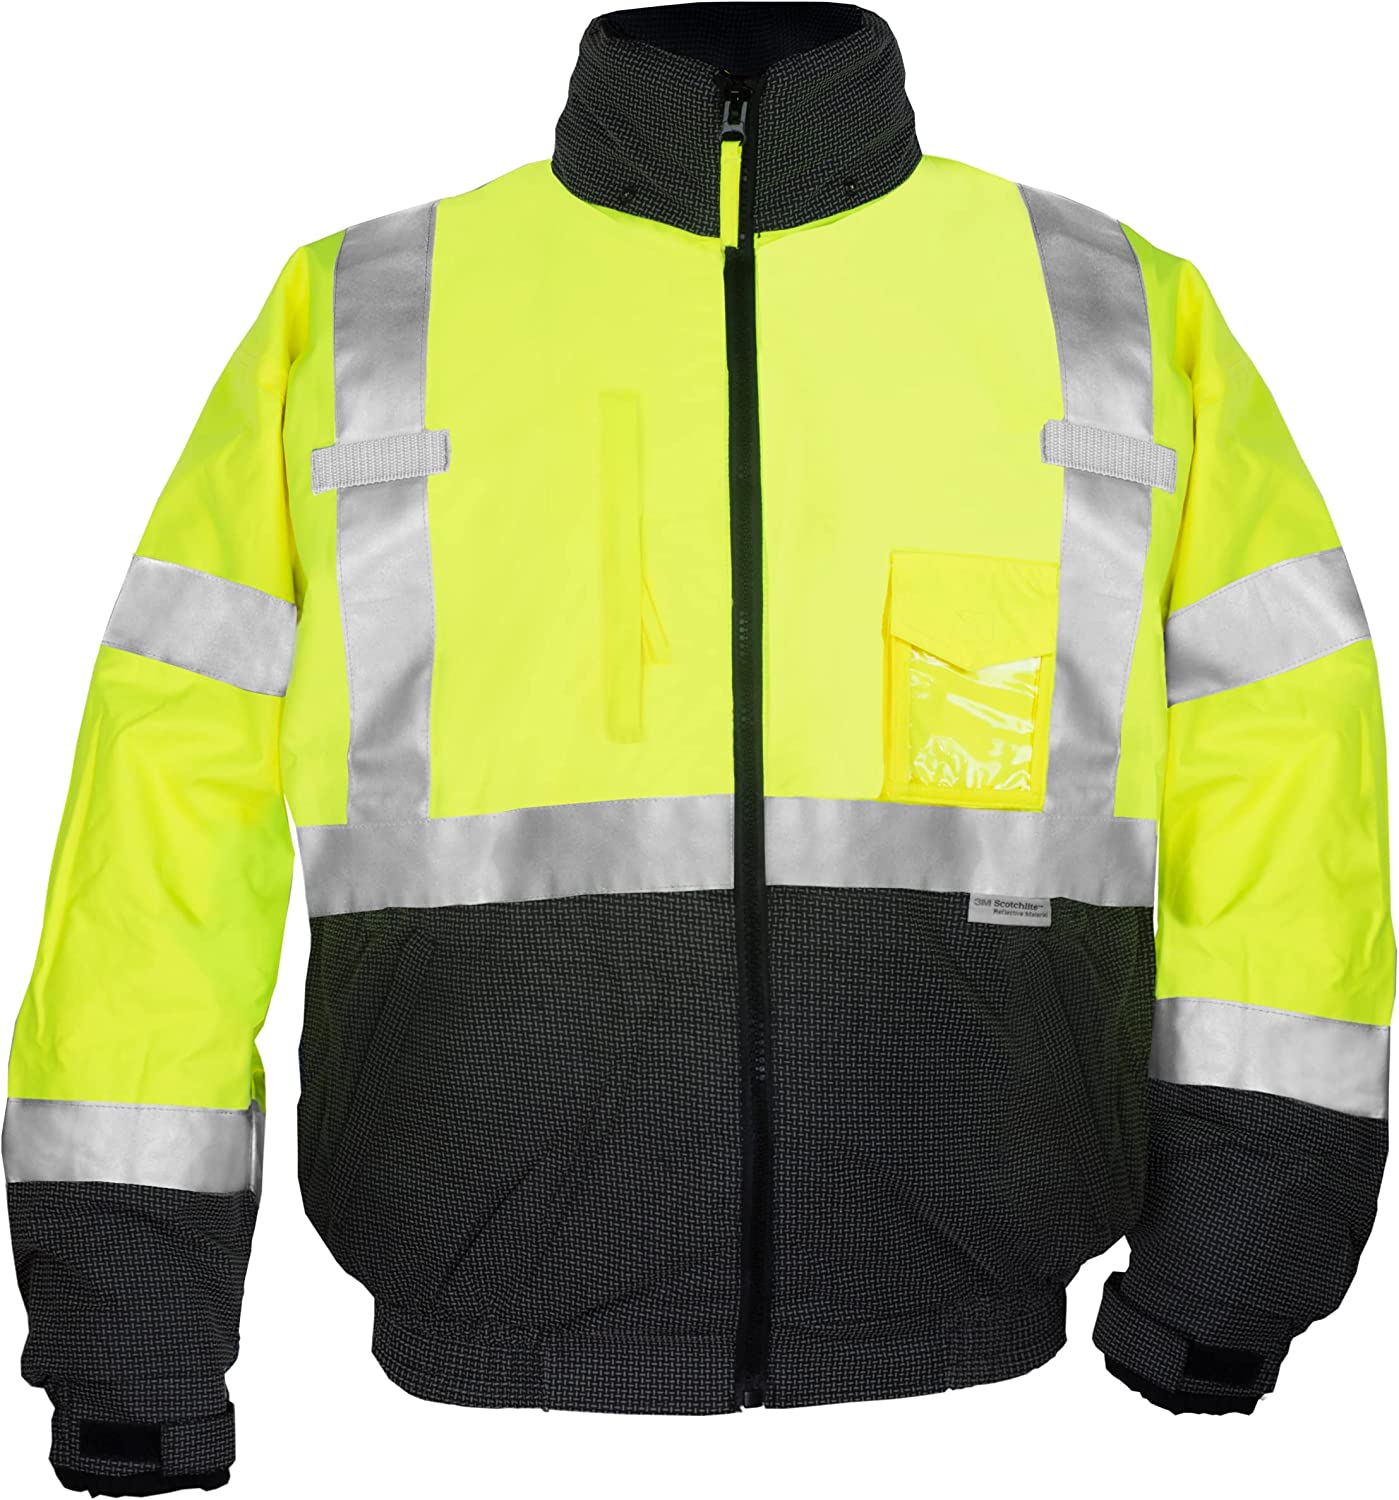 Ironwear 6405 Hi-Visibility Premium Bomber Jacket with Rollaway hood and Reflective fabric | ANSI Class 3